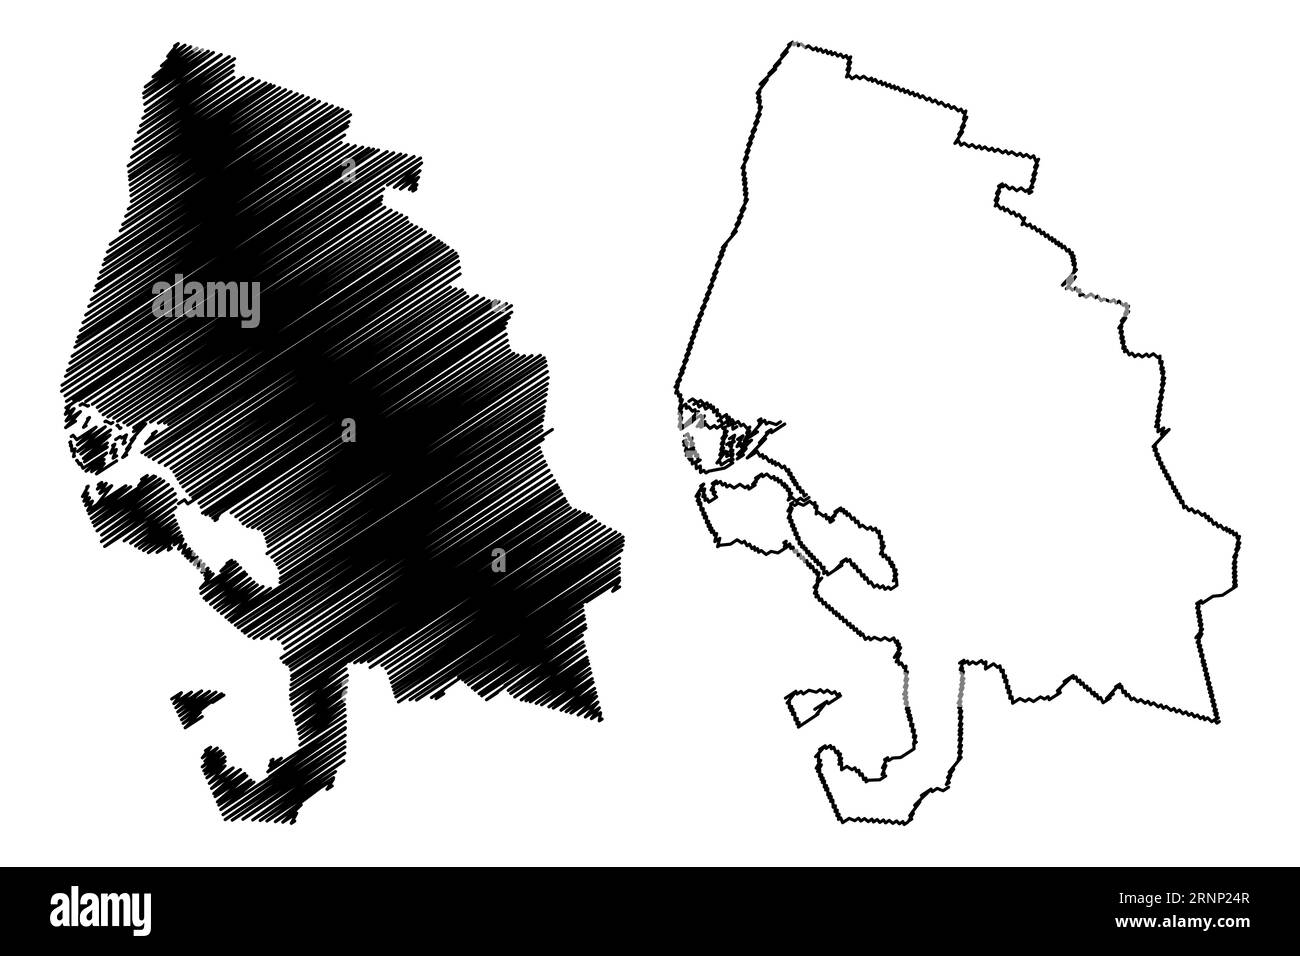 Bergen op Zoom city and municipality (Kingdom of the Netherlands, Holland, North Brabant or Noord-Brabant province) map vector illustration, scribble Stock Vector